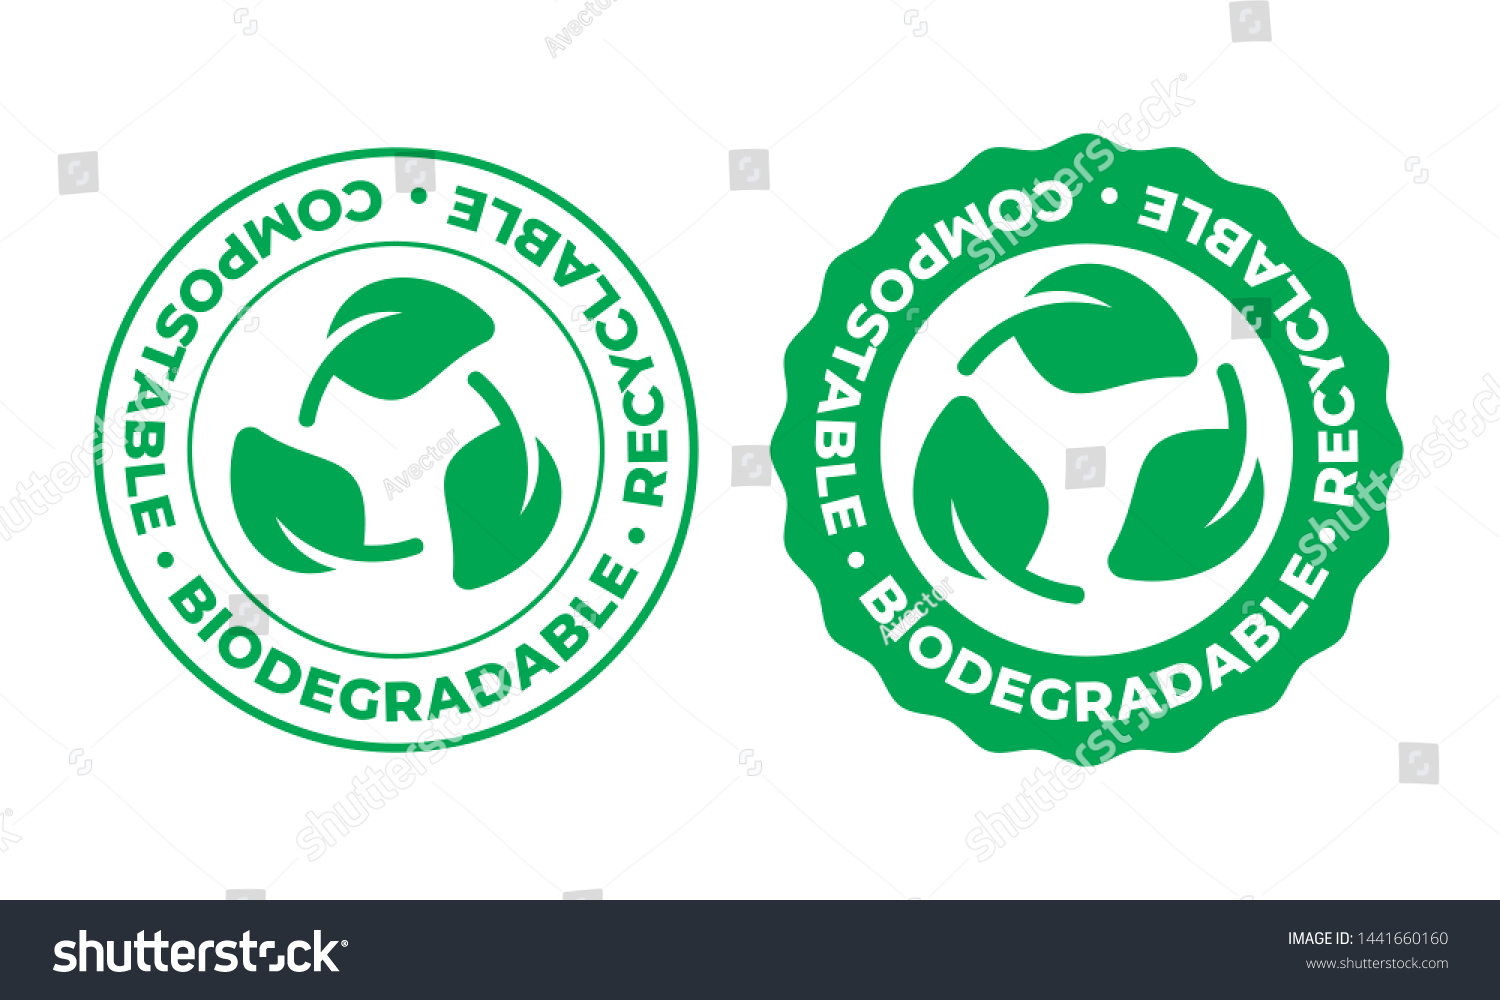 SVG of Biodegradable, compostable and recyclable vector icon. Bio recycling eco friendly package green leaf stamp logo svg